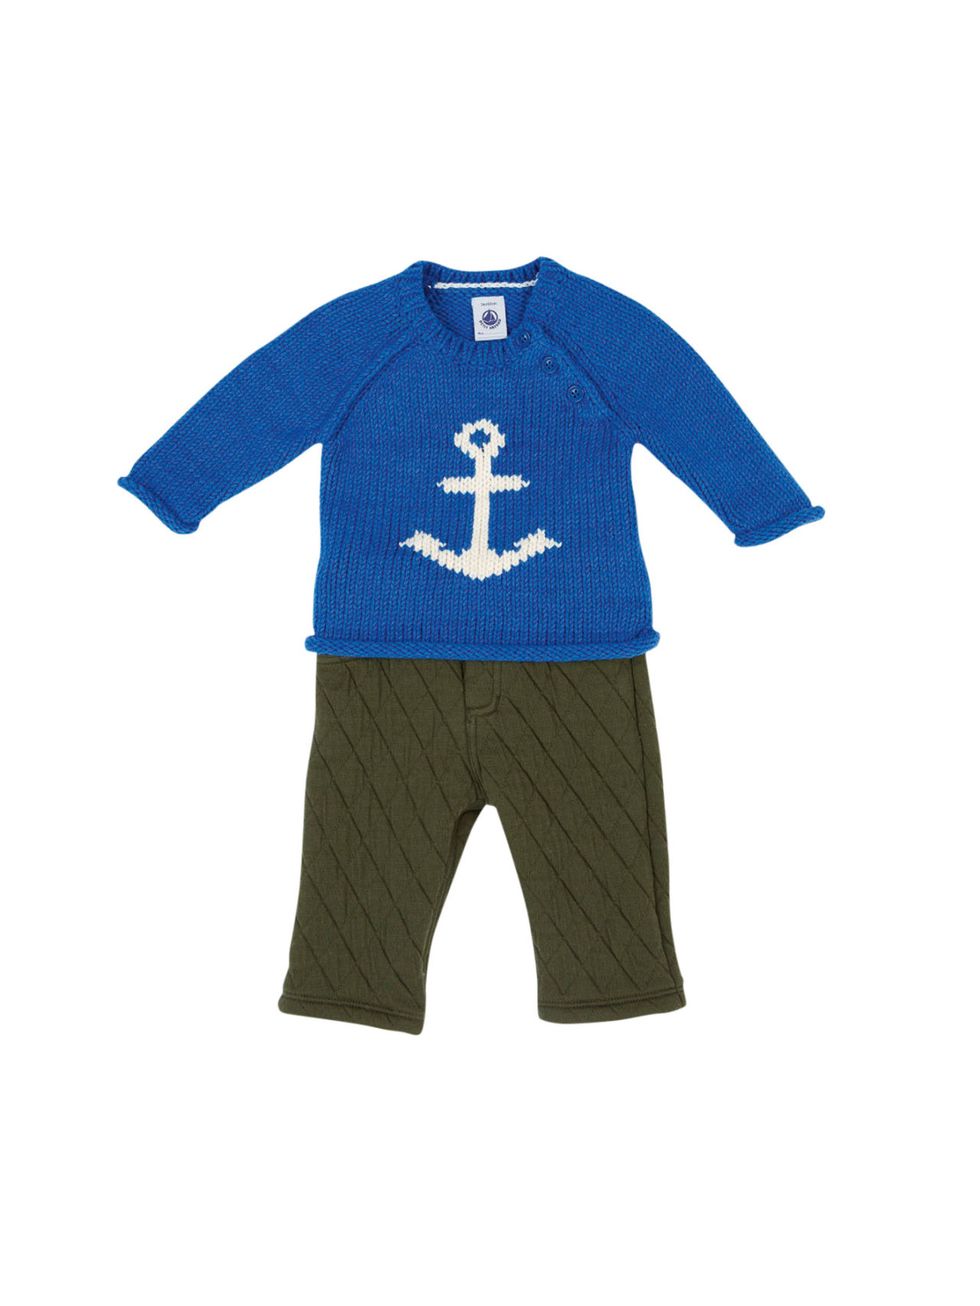 Clothing, Product, Blue, Sleeve, T-shirt, Turquoise, Baby & toddler clothing, Sportswear, Jersey, Outerwear, 